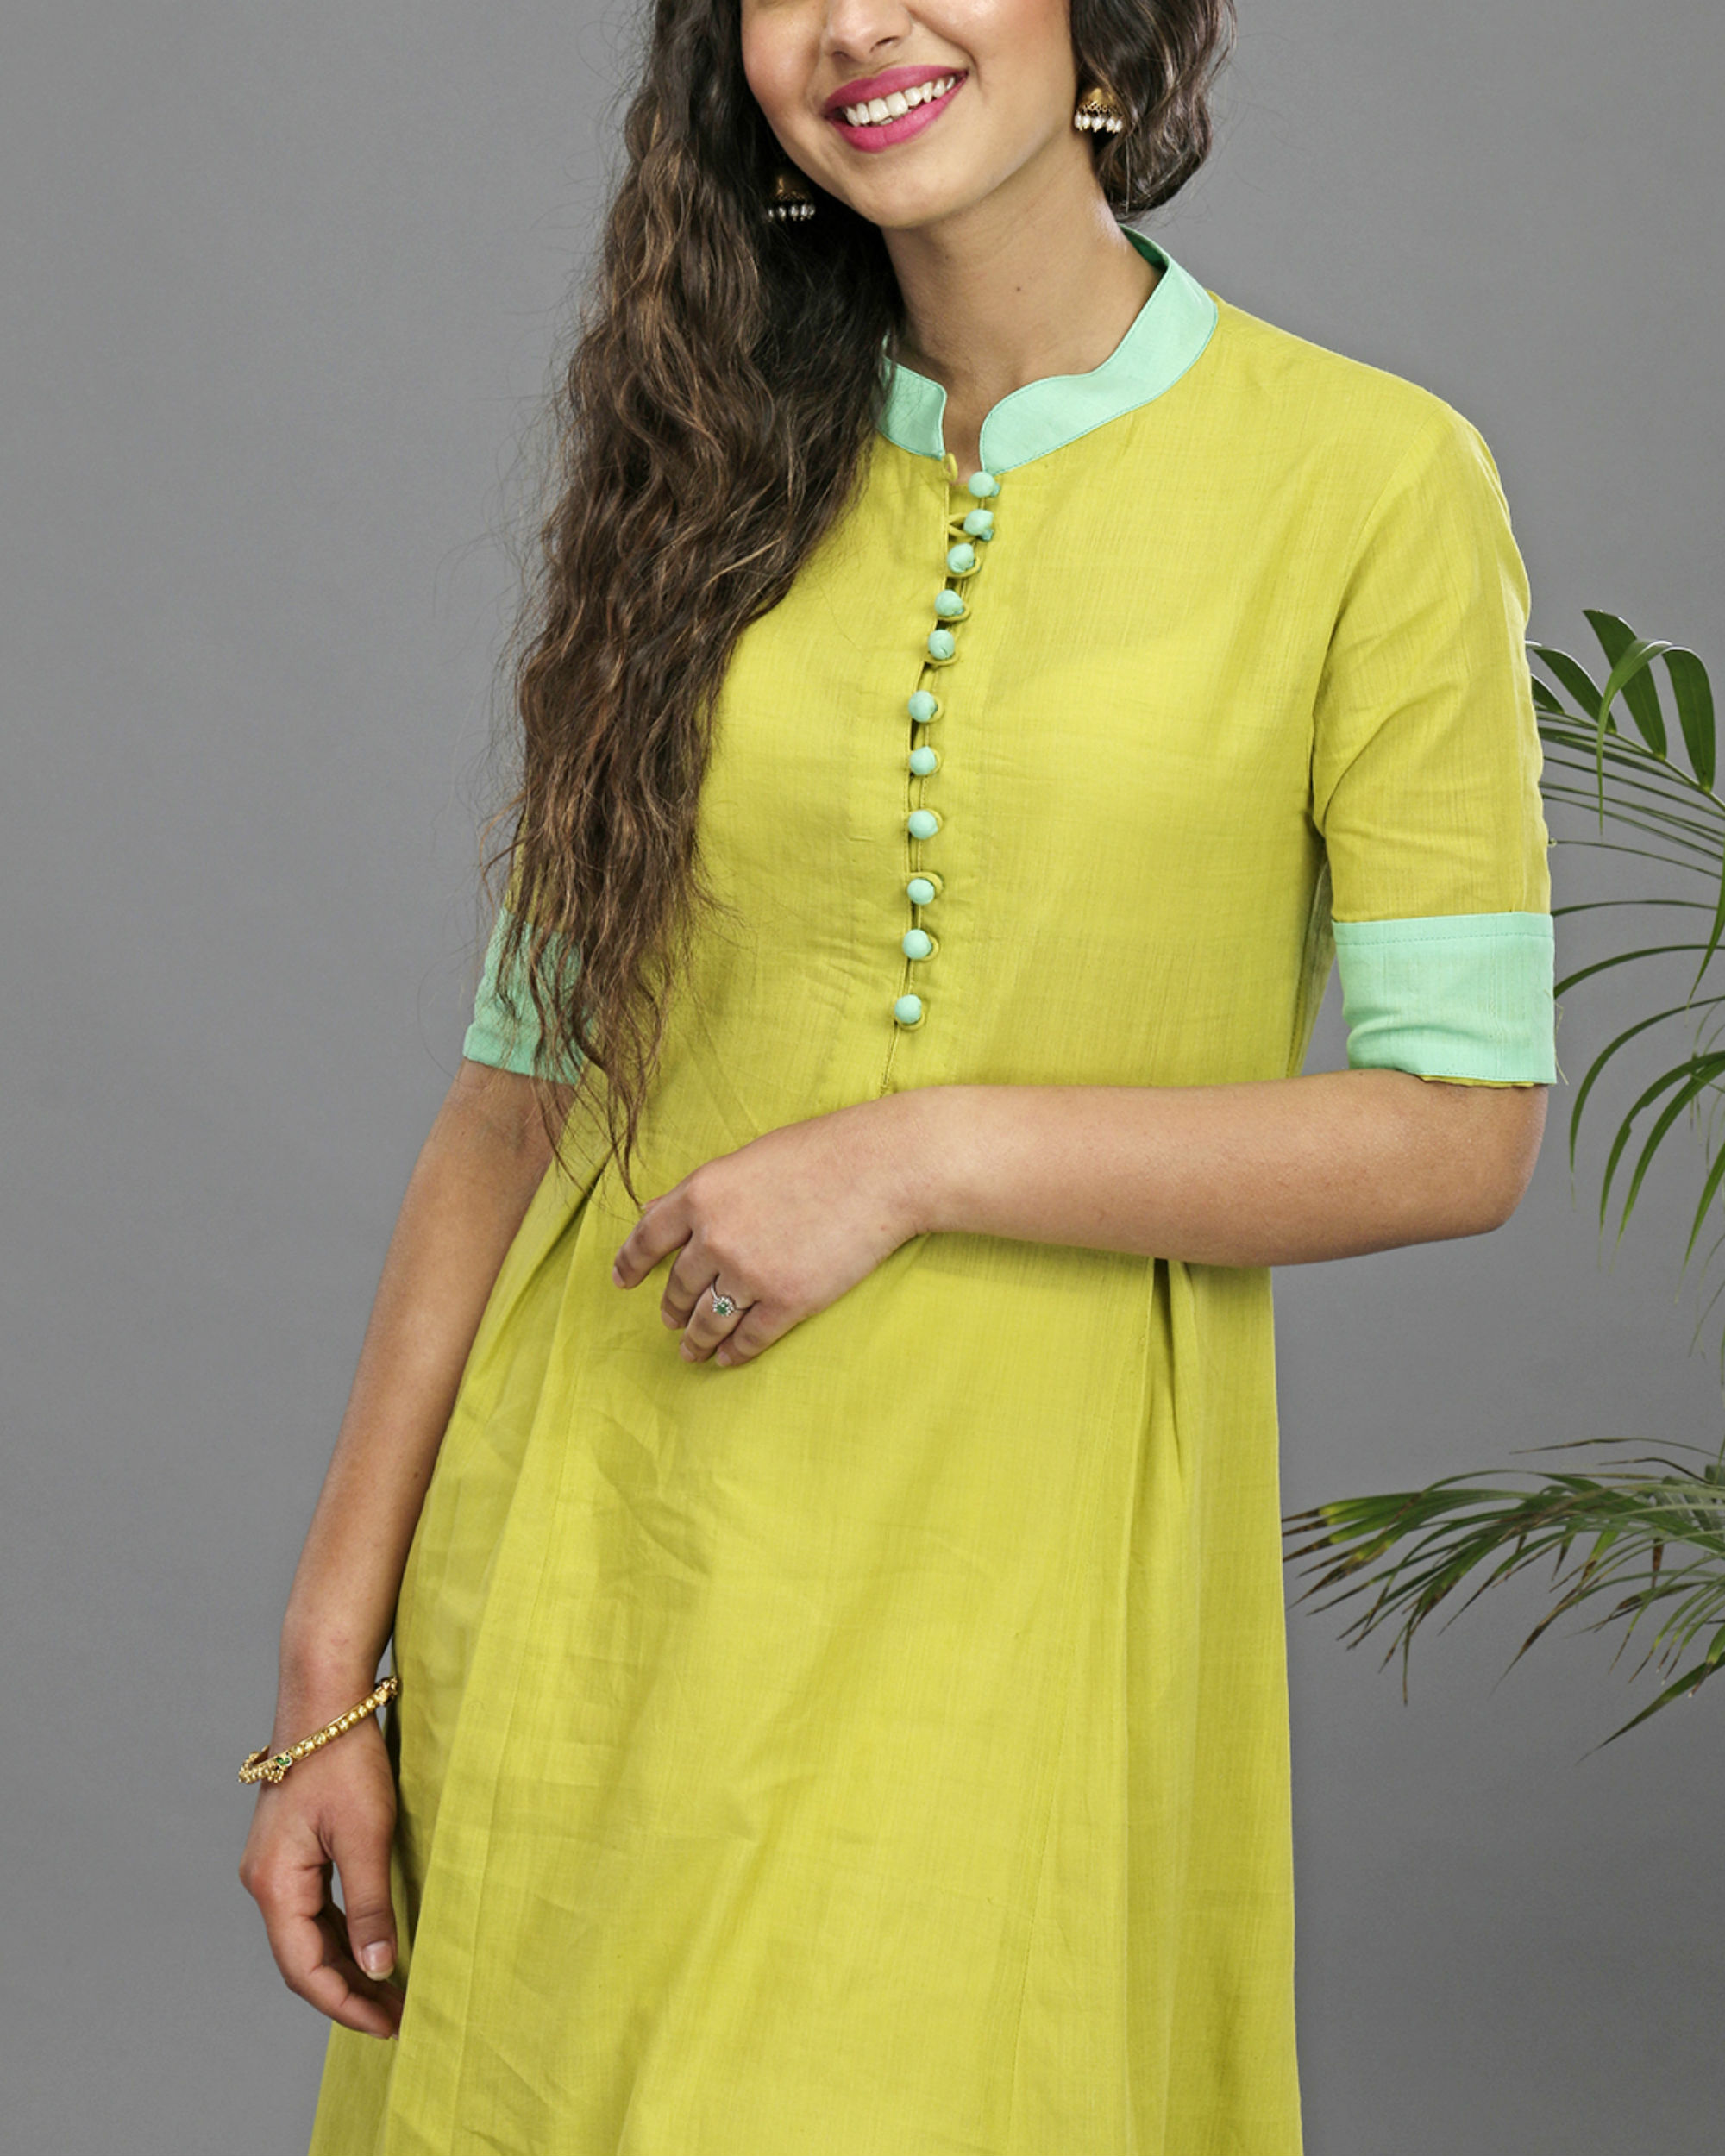 Lime & turquoise tunic by Raasleela | The Secret Label